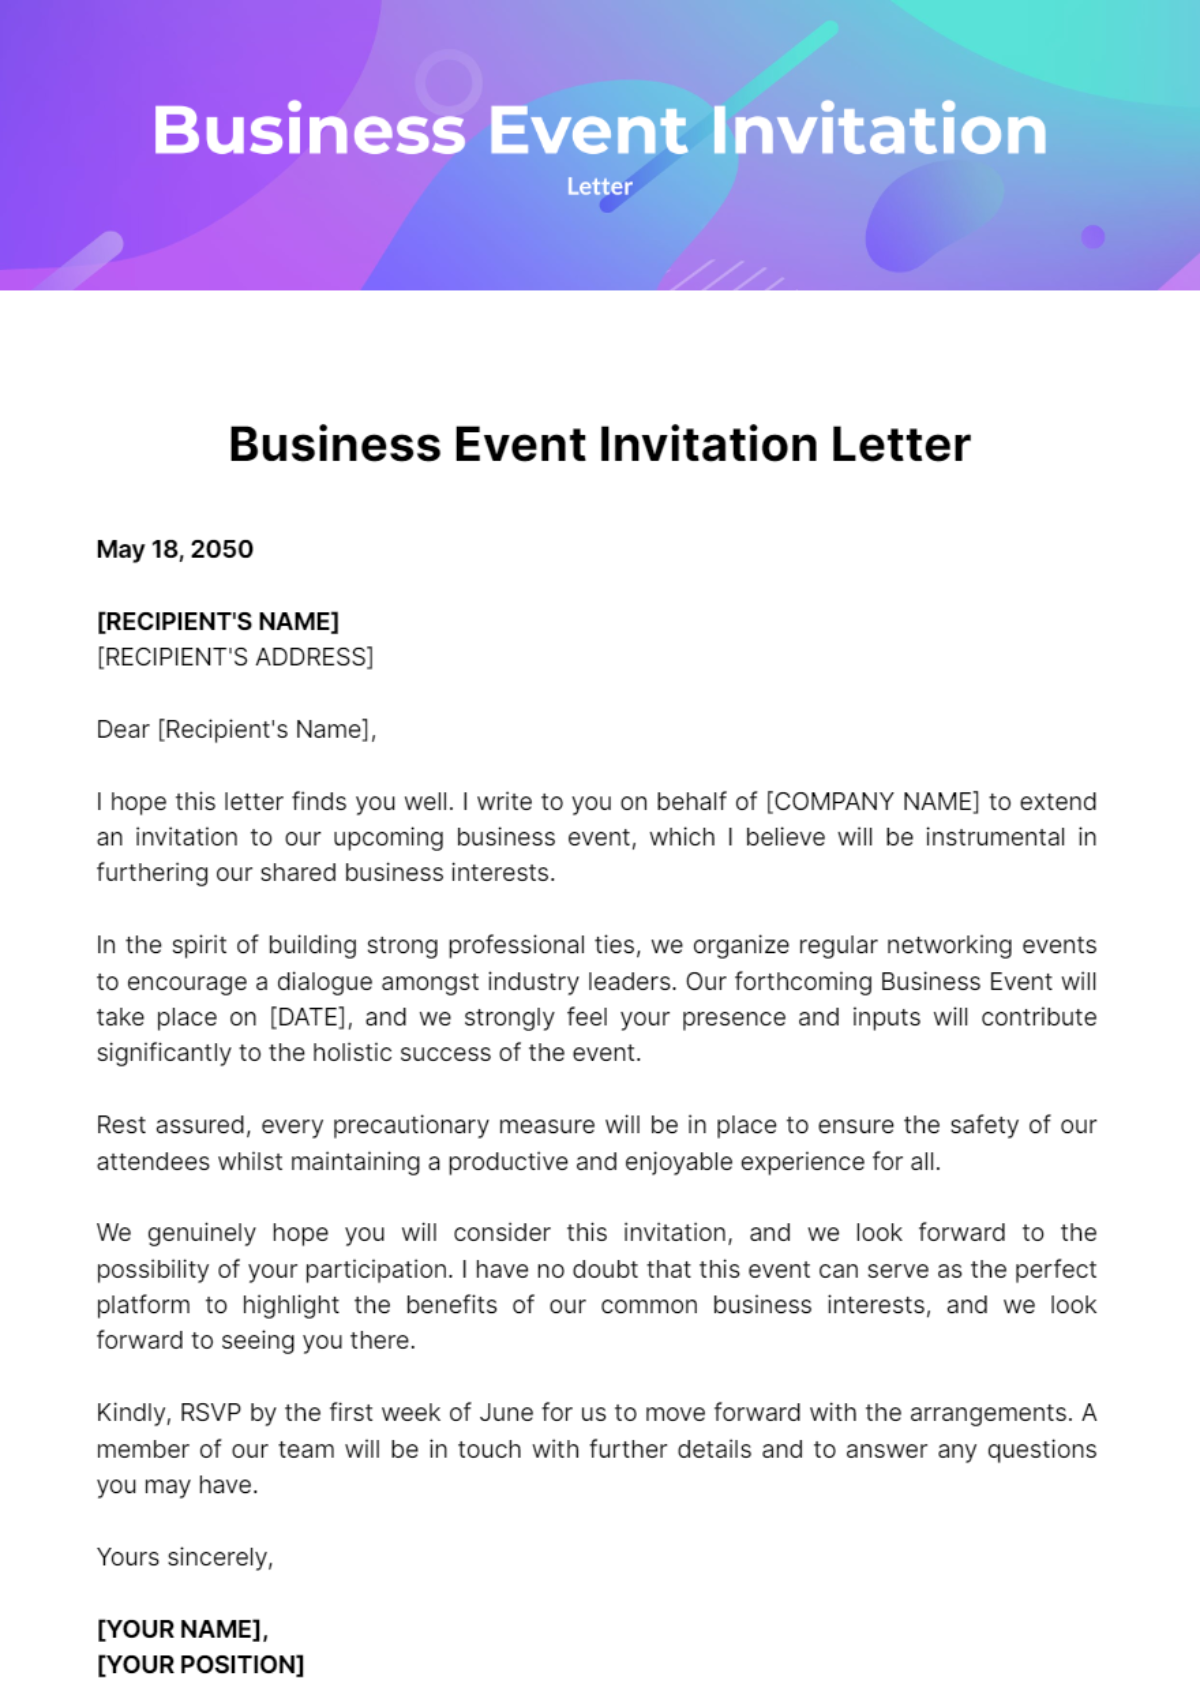 Business Event Invitation Letter Template